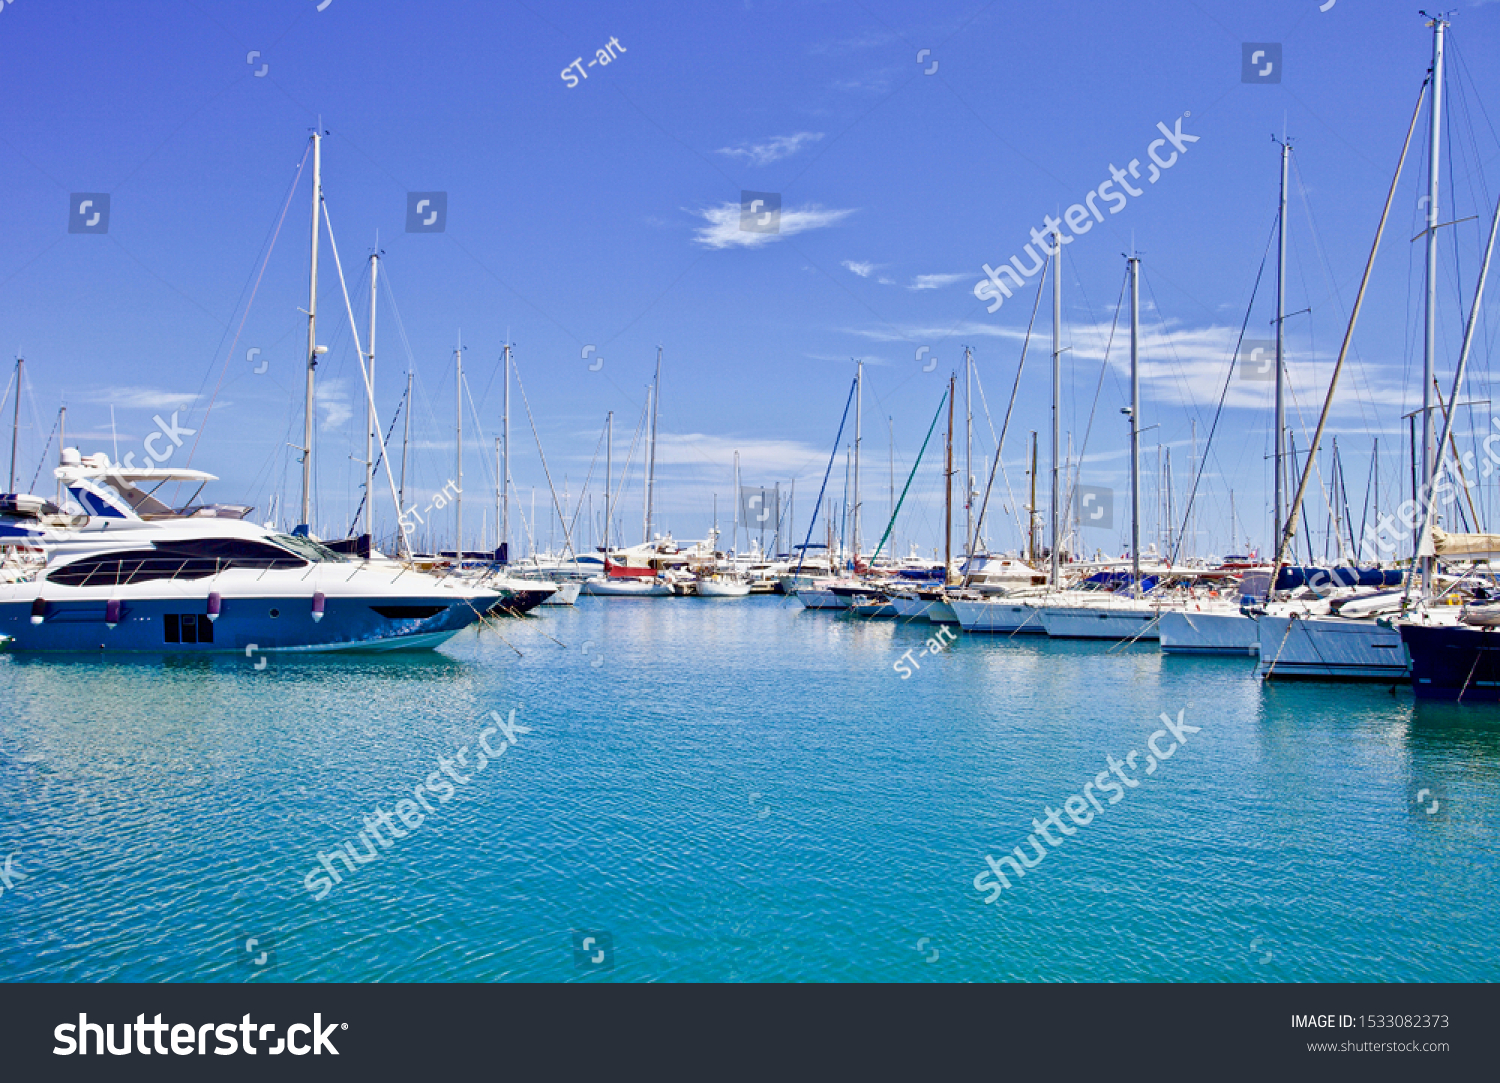 yachts and speed boats at harbor. yachts moored in the port. Ocean Coast pier. High class lifestyle. Yachting. Expensive toys. Sea ​​transport. Journey. Yachting sport. Expensive yachts at the pier #1533082373